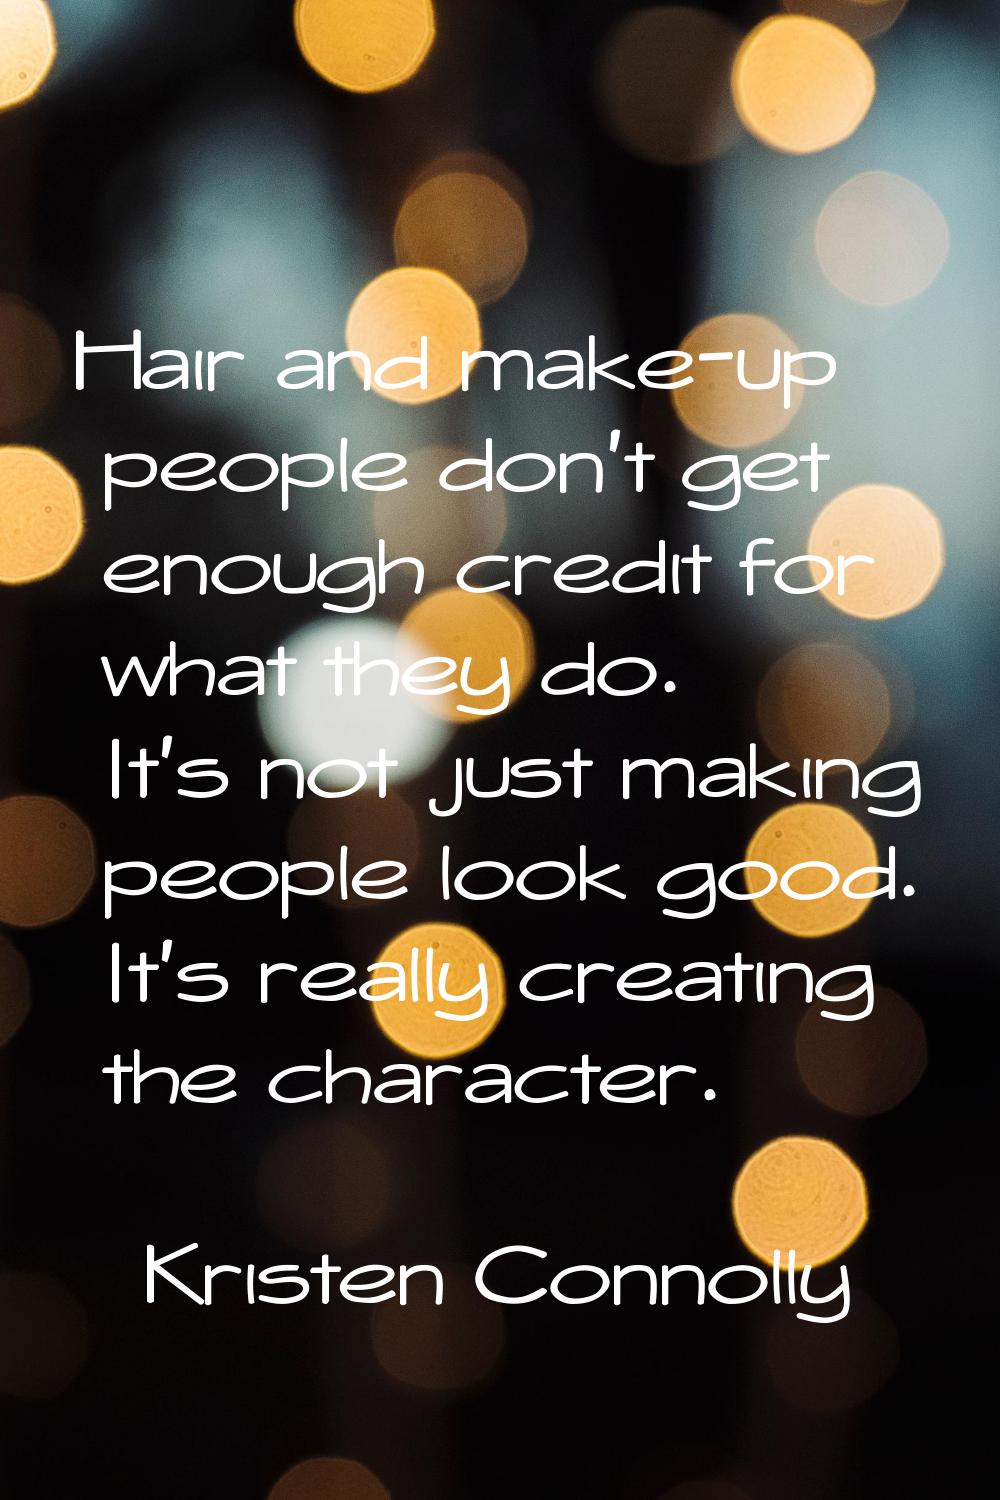 Hair and make-up people don't get enough credit for what they do. It's not just making people look 